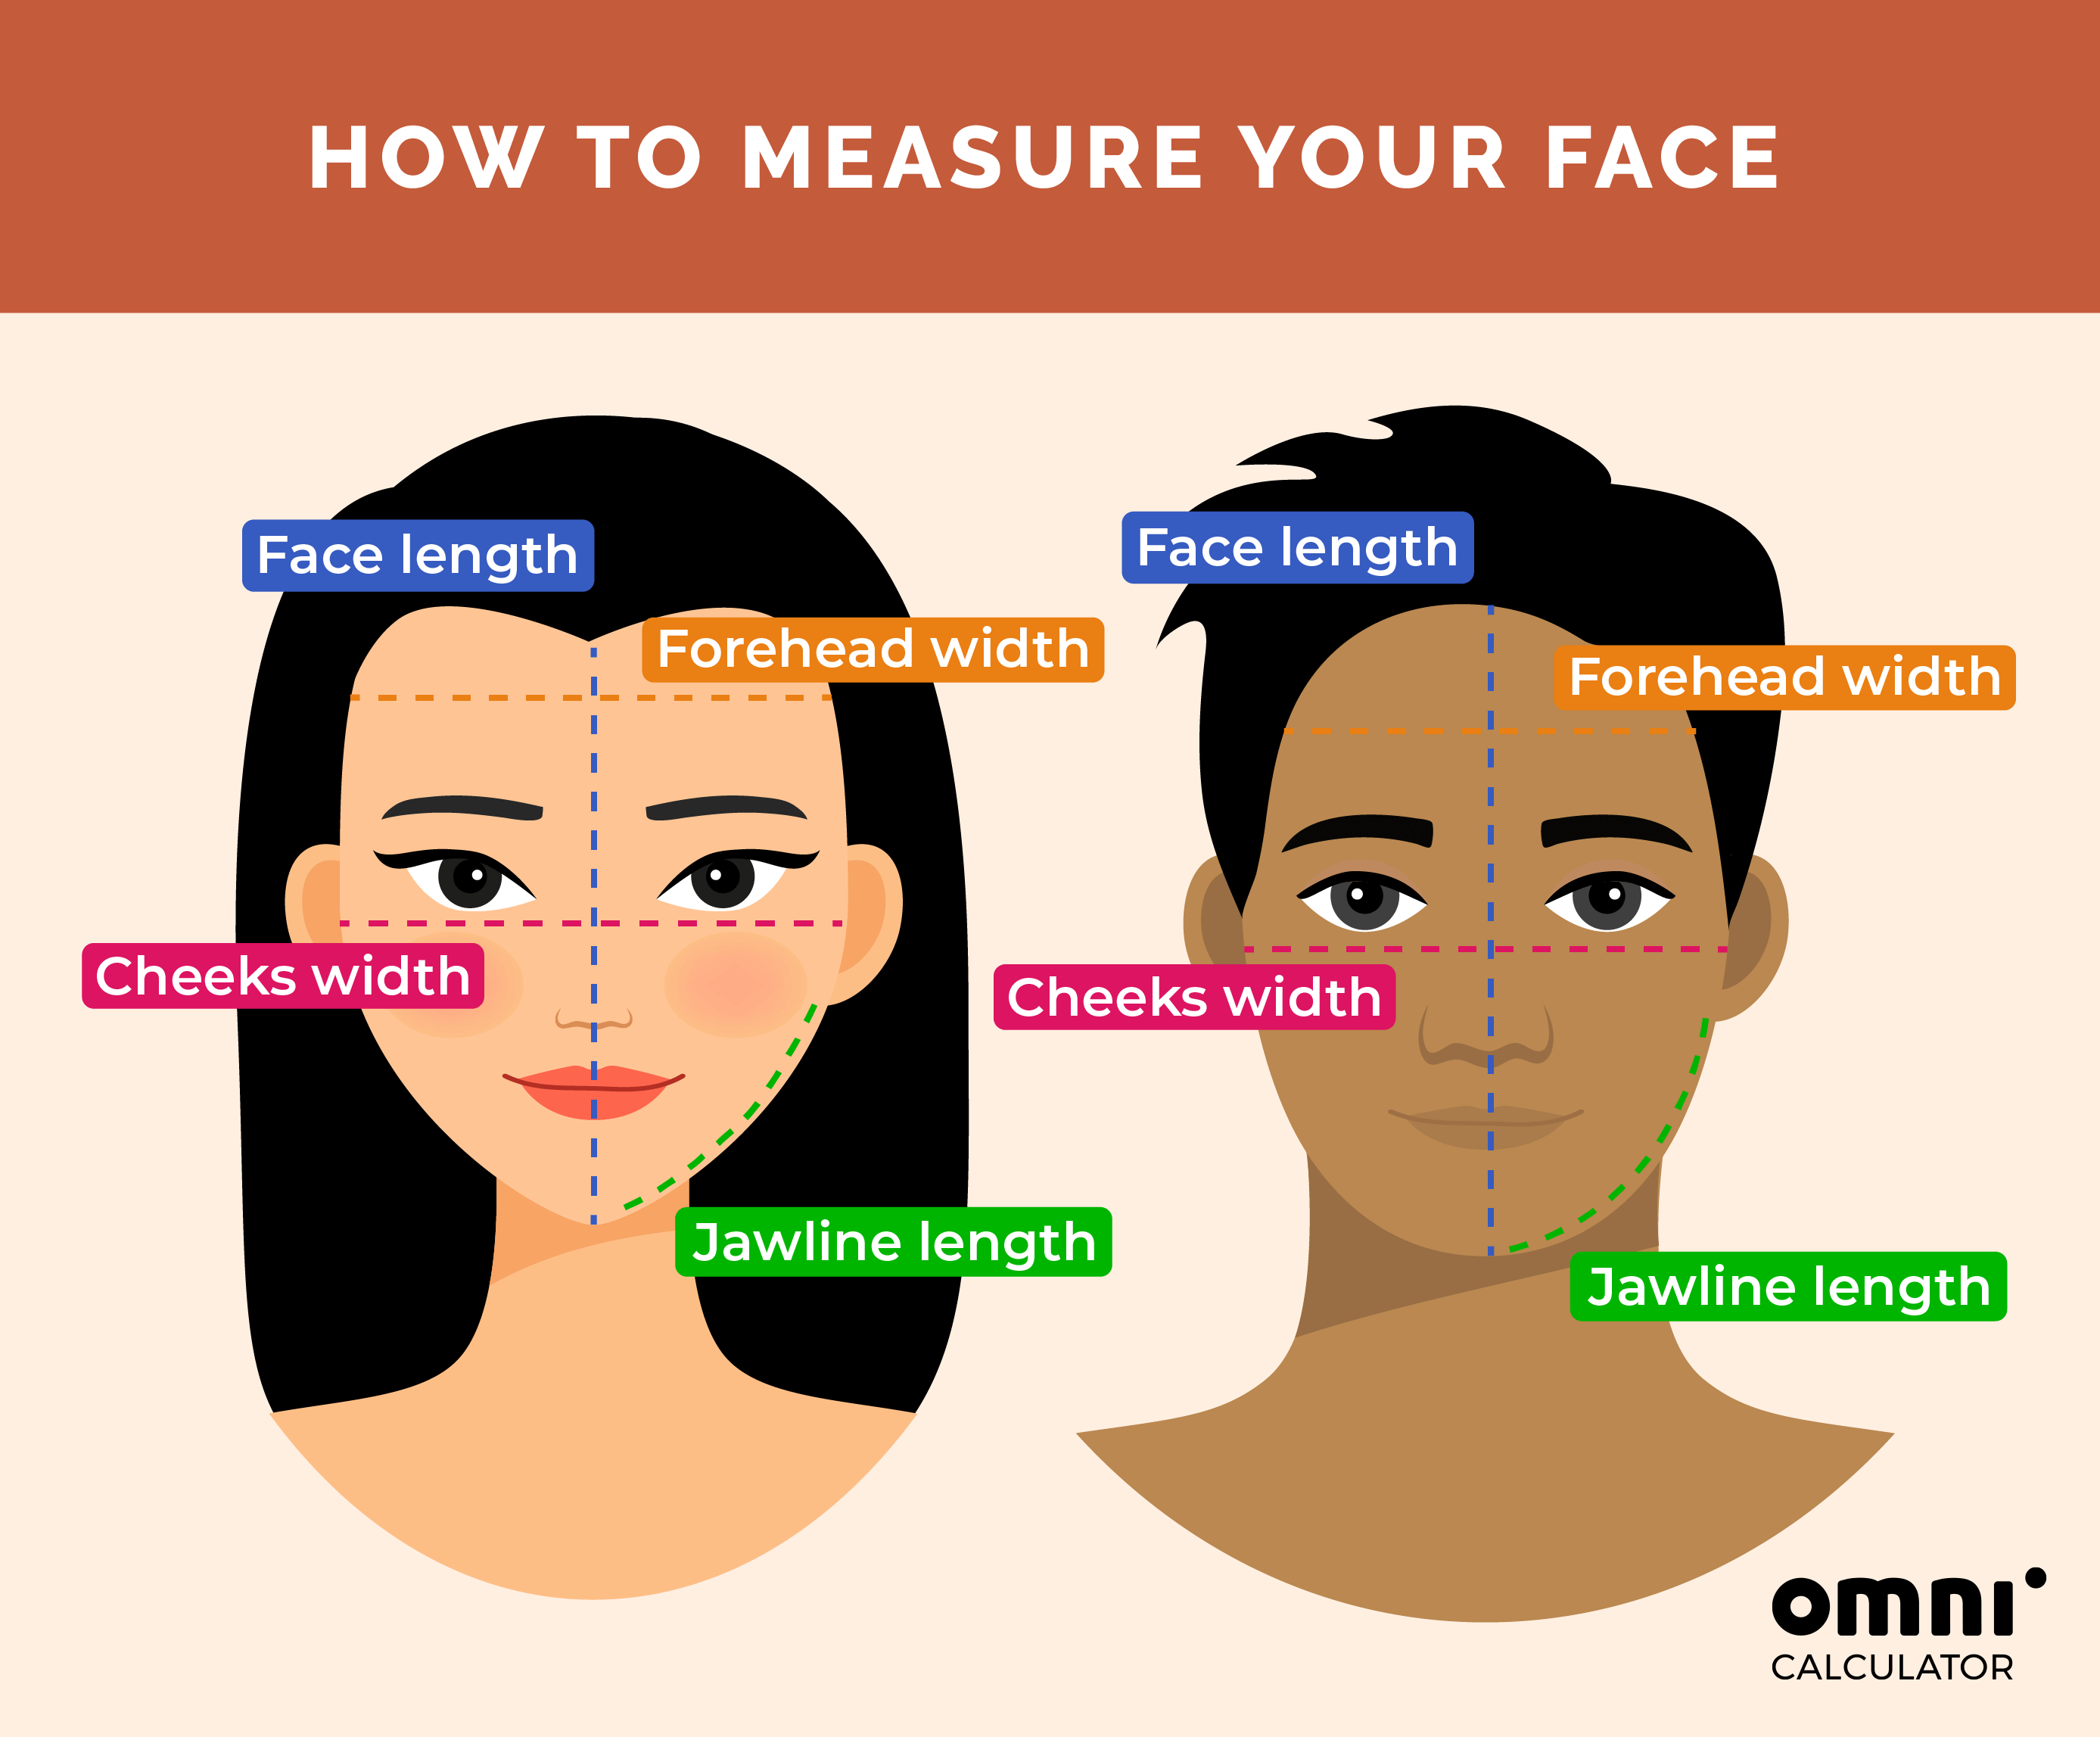 How to measure your face (both genders' faces)